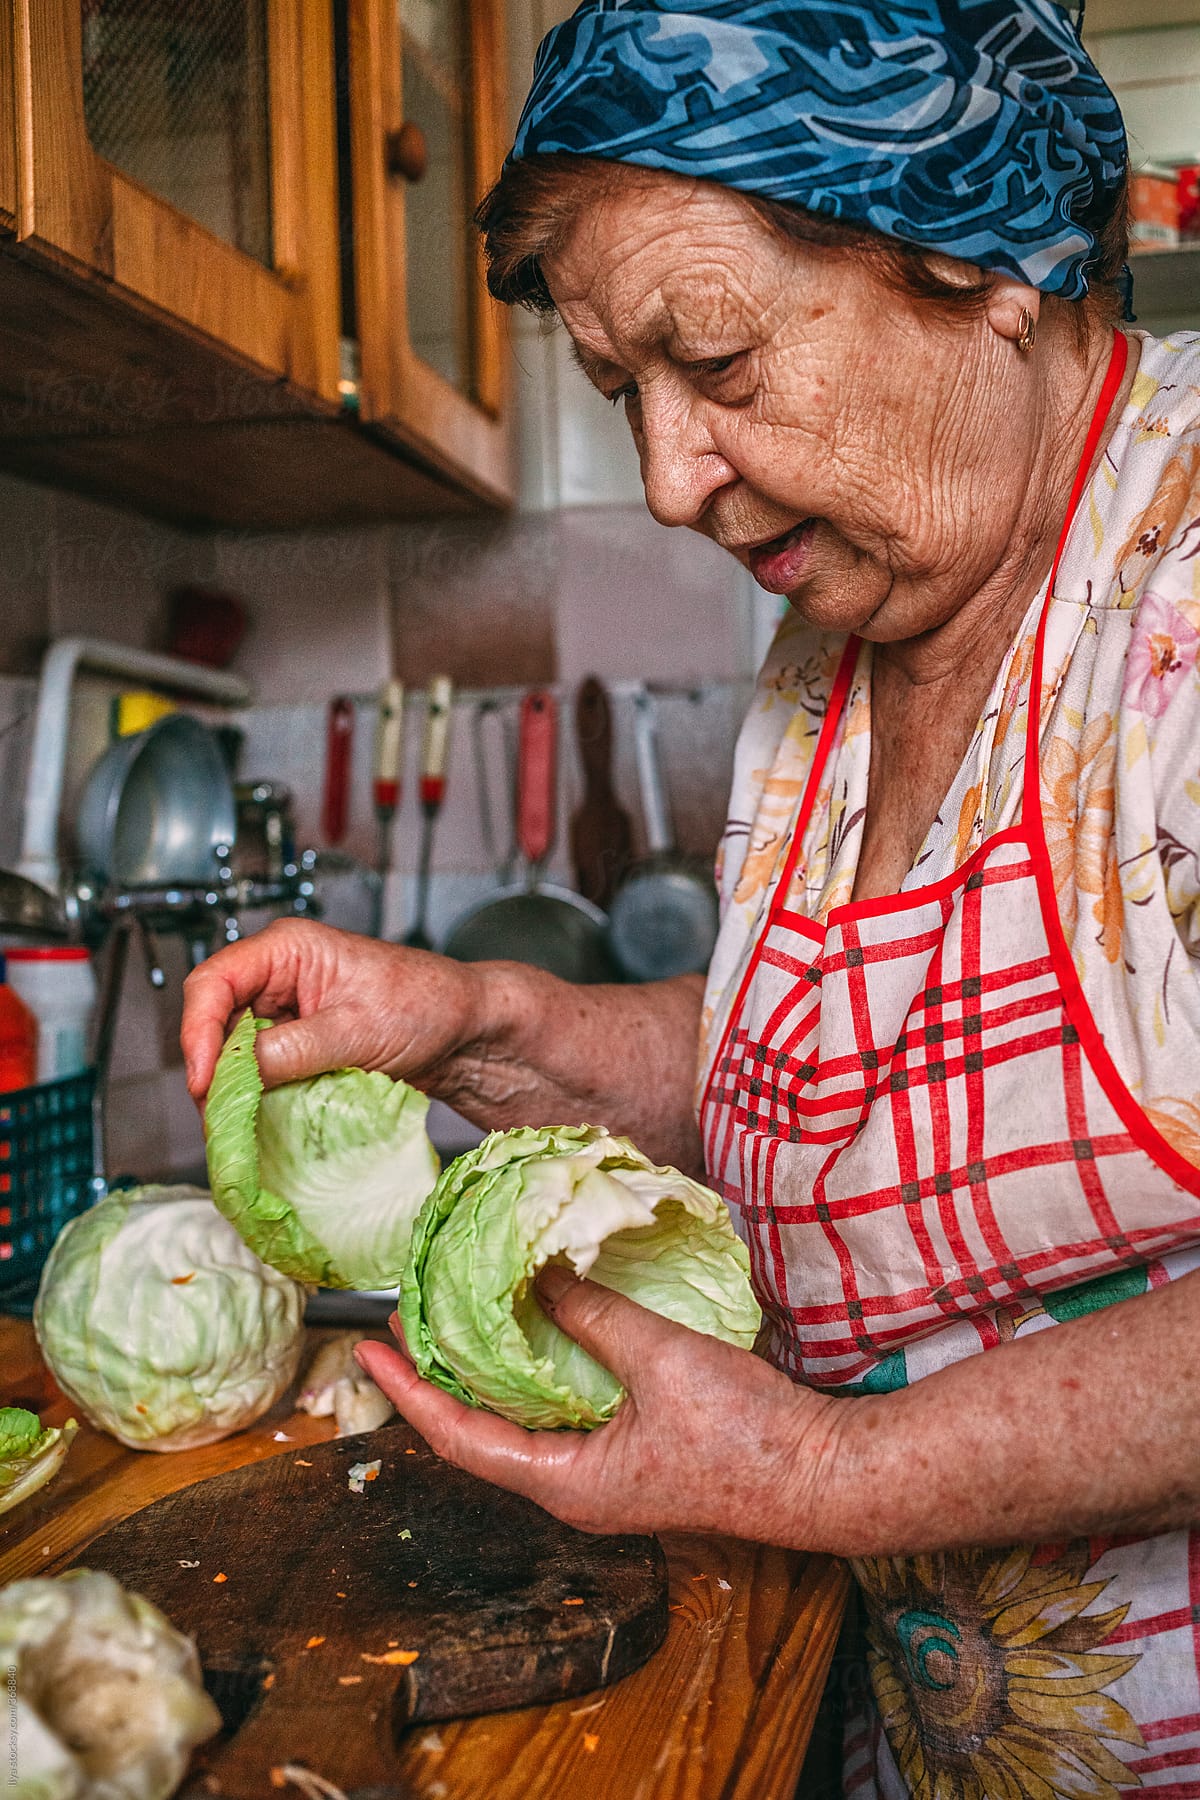 Old woman cooking vegetables